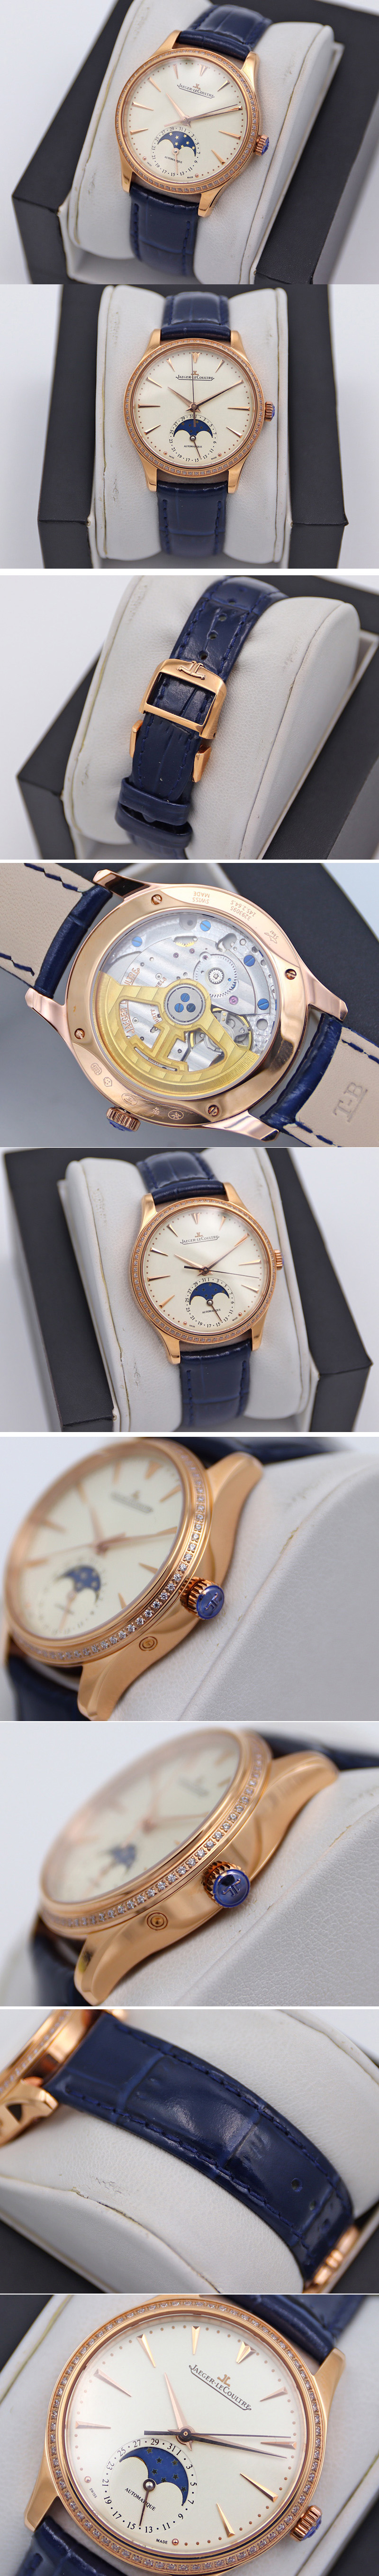 Replica Jaeger-LeCoultre Master Ultra Thin Moonphase RG/LE Diamond Bezel White Dial Blue Leather Strap TW MY9015 to Cal.925